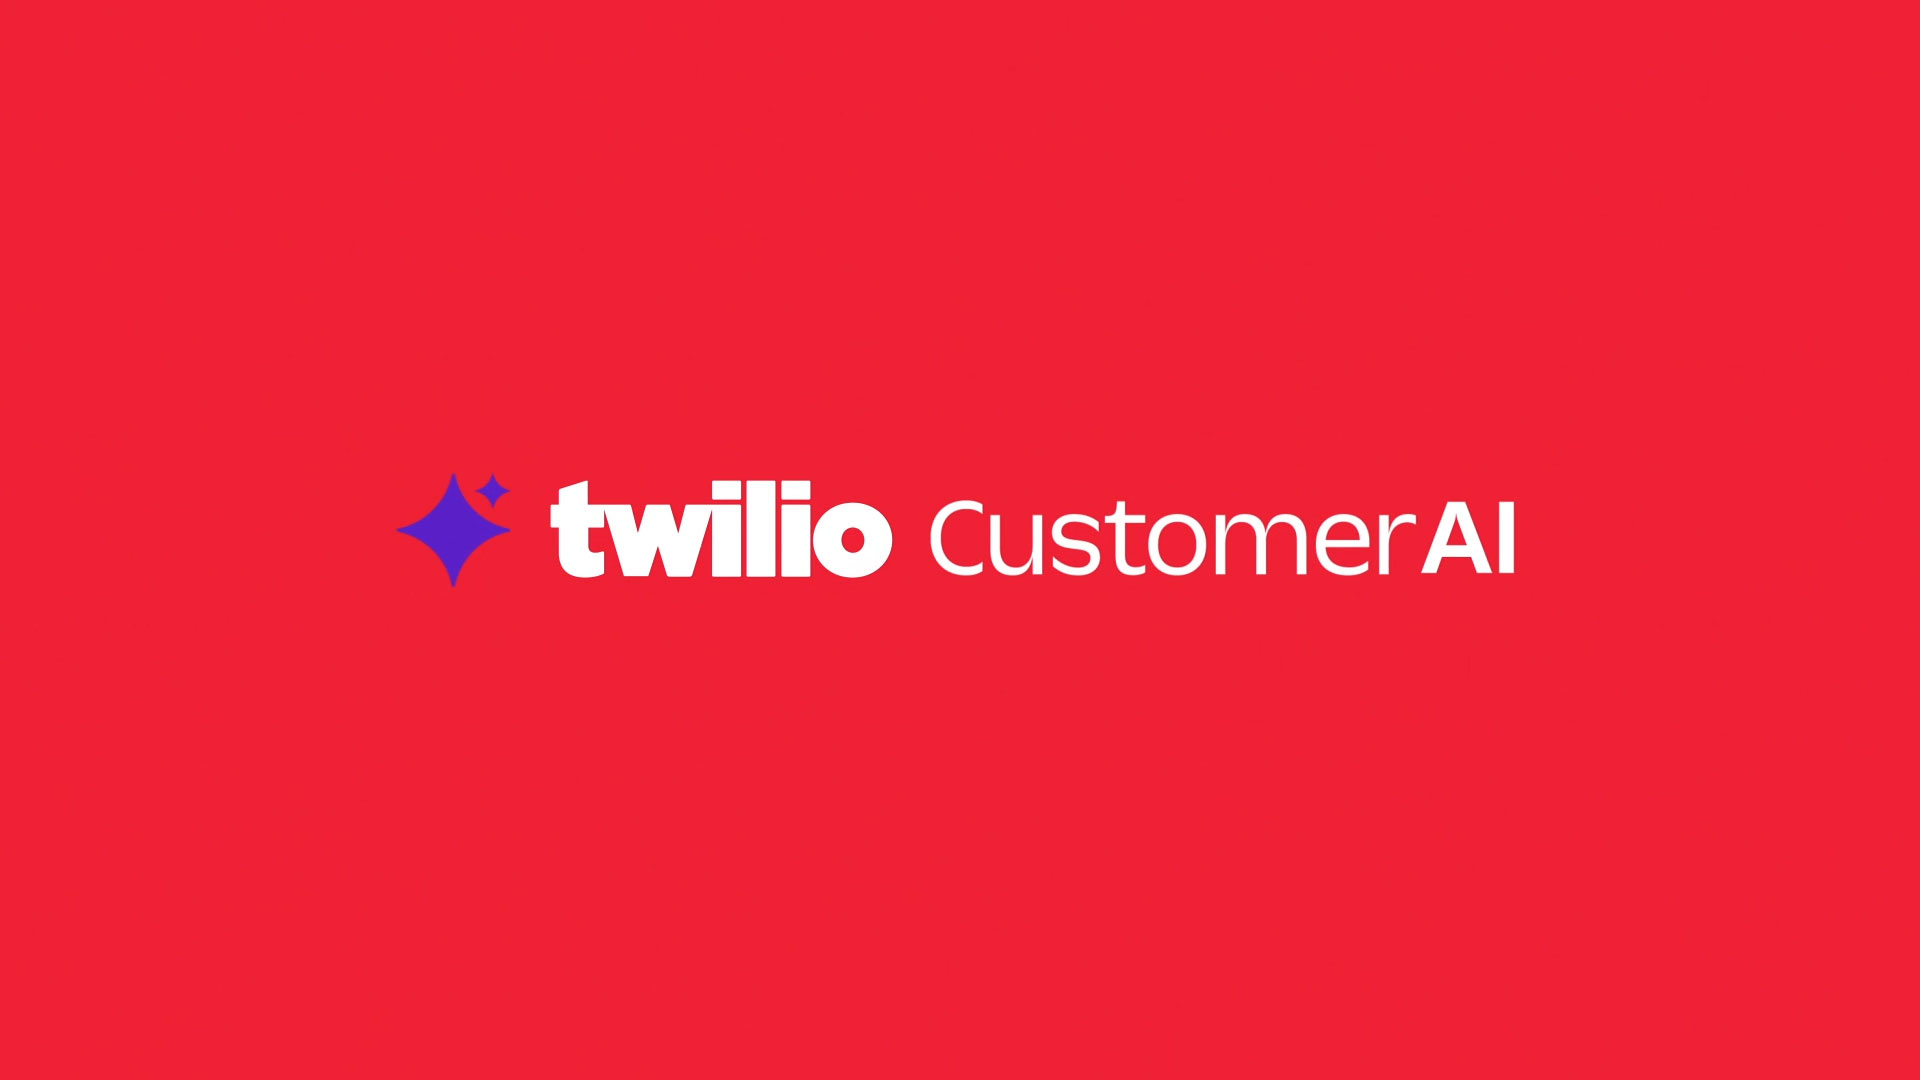 Twilio’s CustomerAI technology couples the power of large language models (LLMs) with the rich customer data that flows through Twilio’s Customer Engagement Platform, to help companies unlock the potential of their customers.